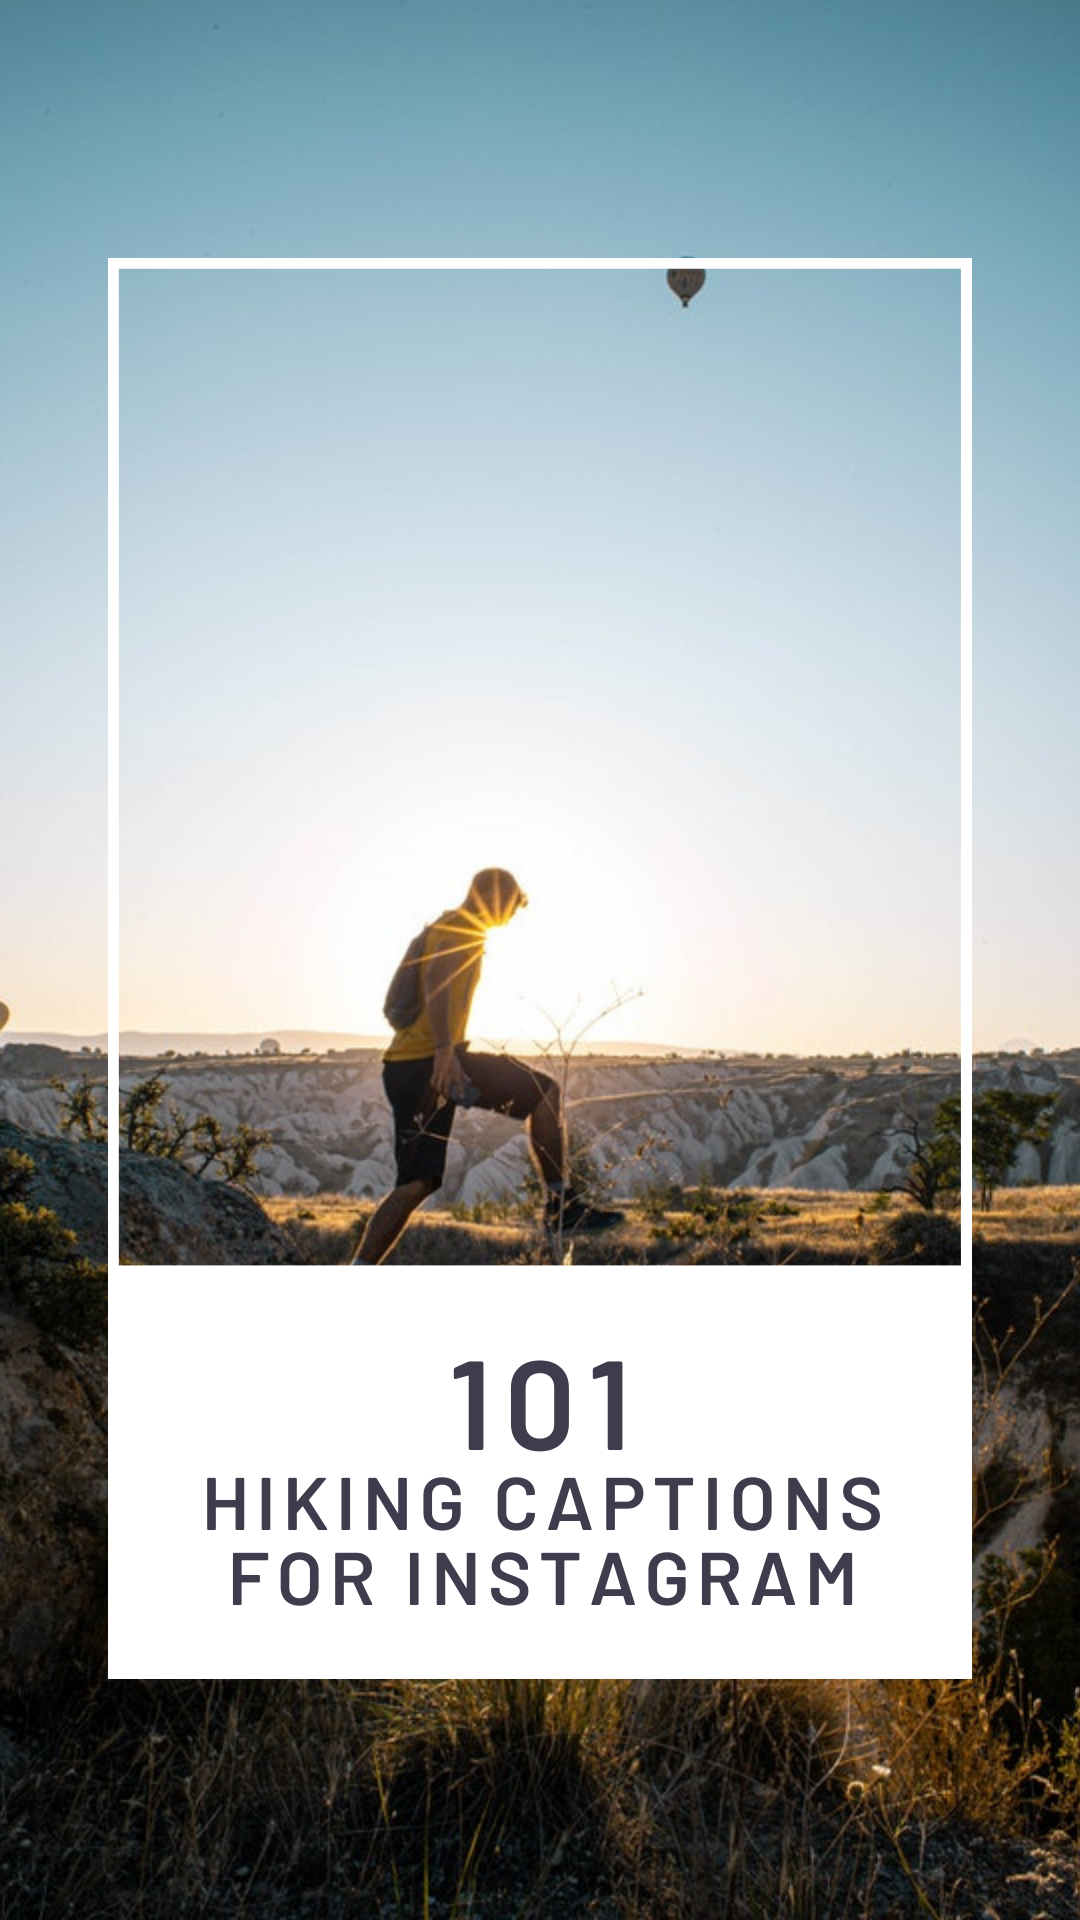 Hiking captions for instagram